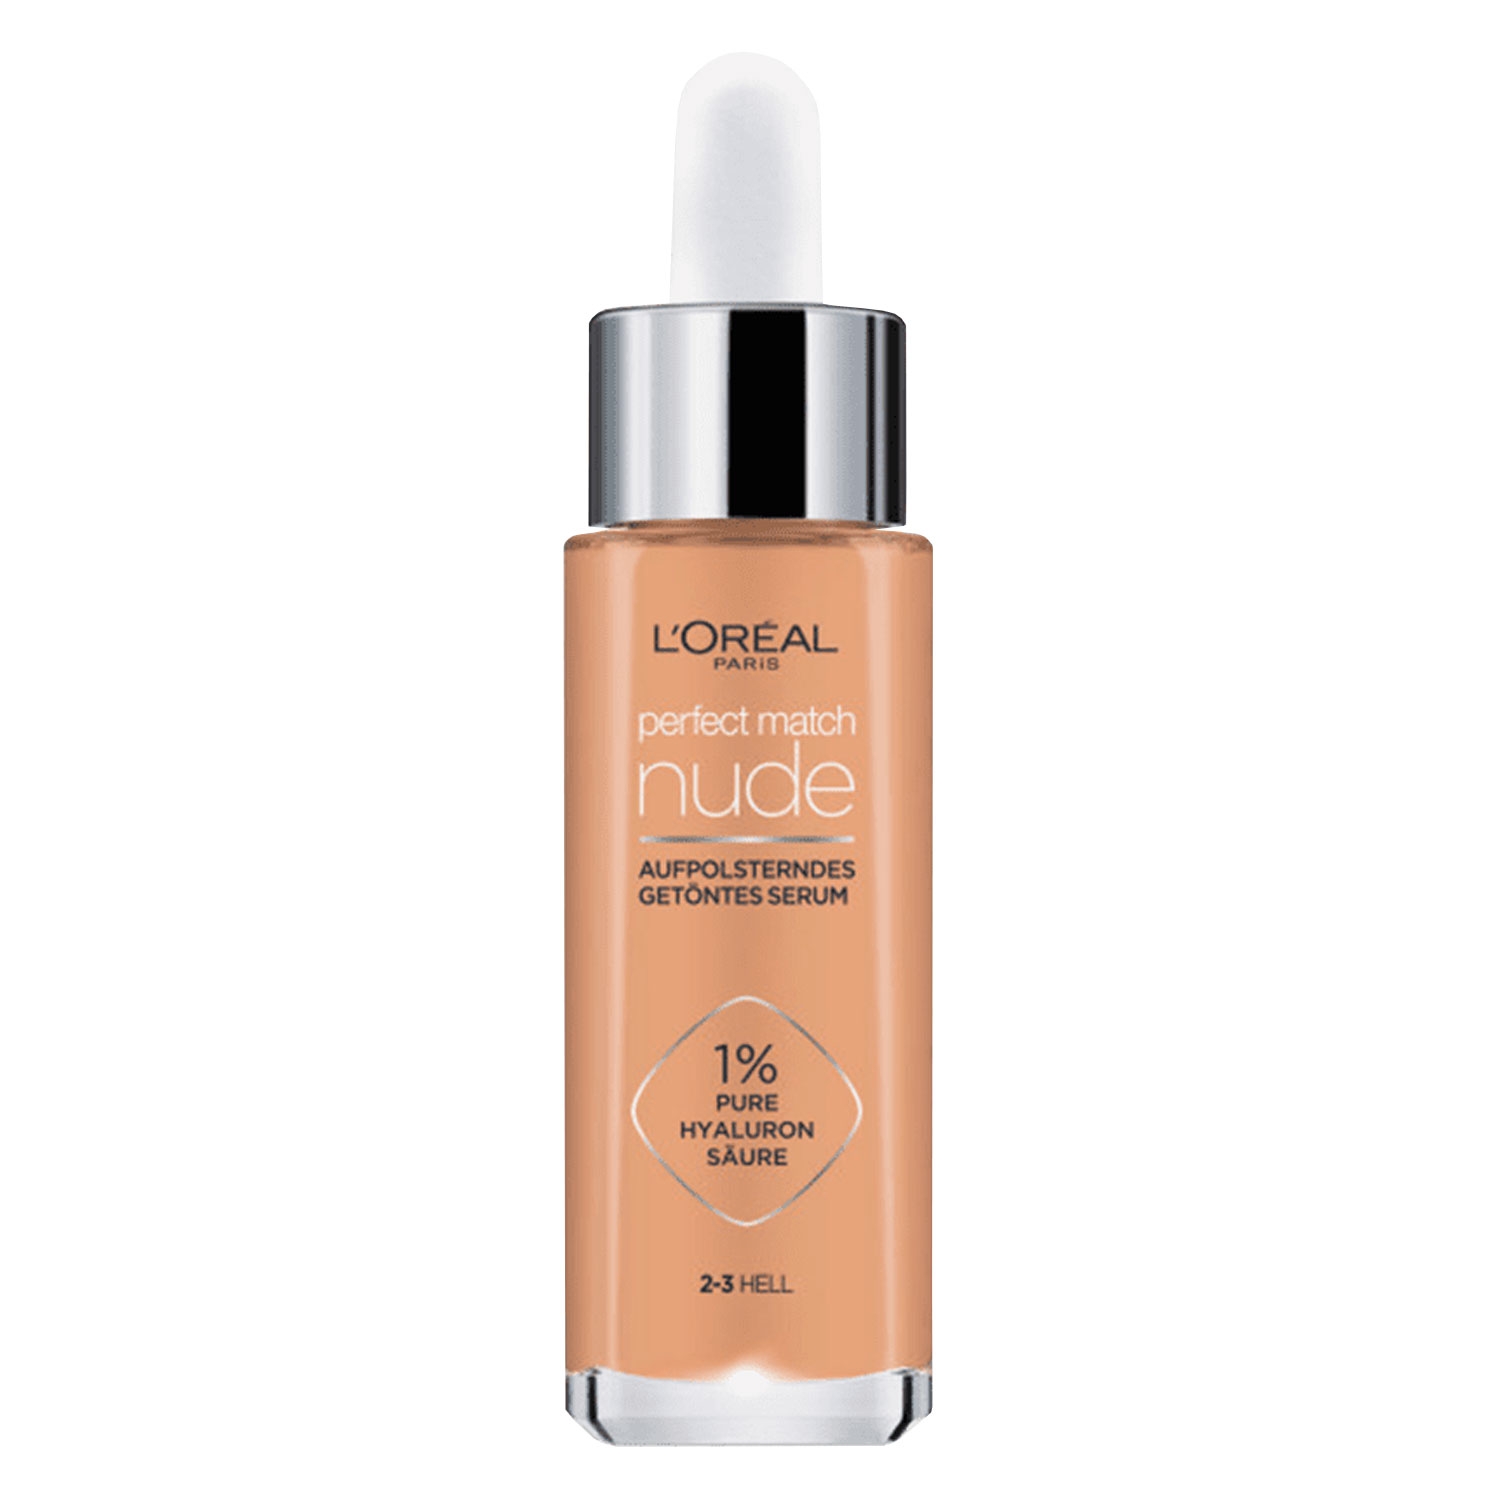 Product image from LOréal Perfect Match - Nude Aufpolsterndes Getöntes Serum 2-3 Hell